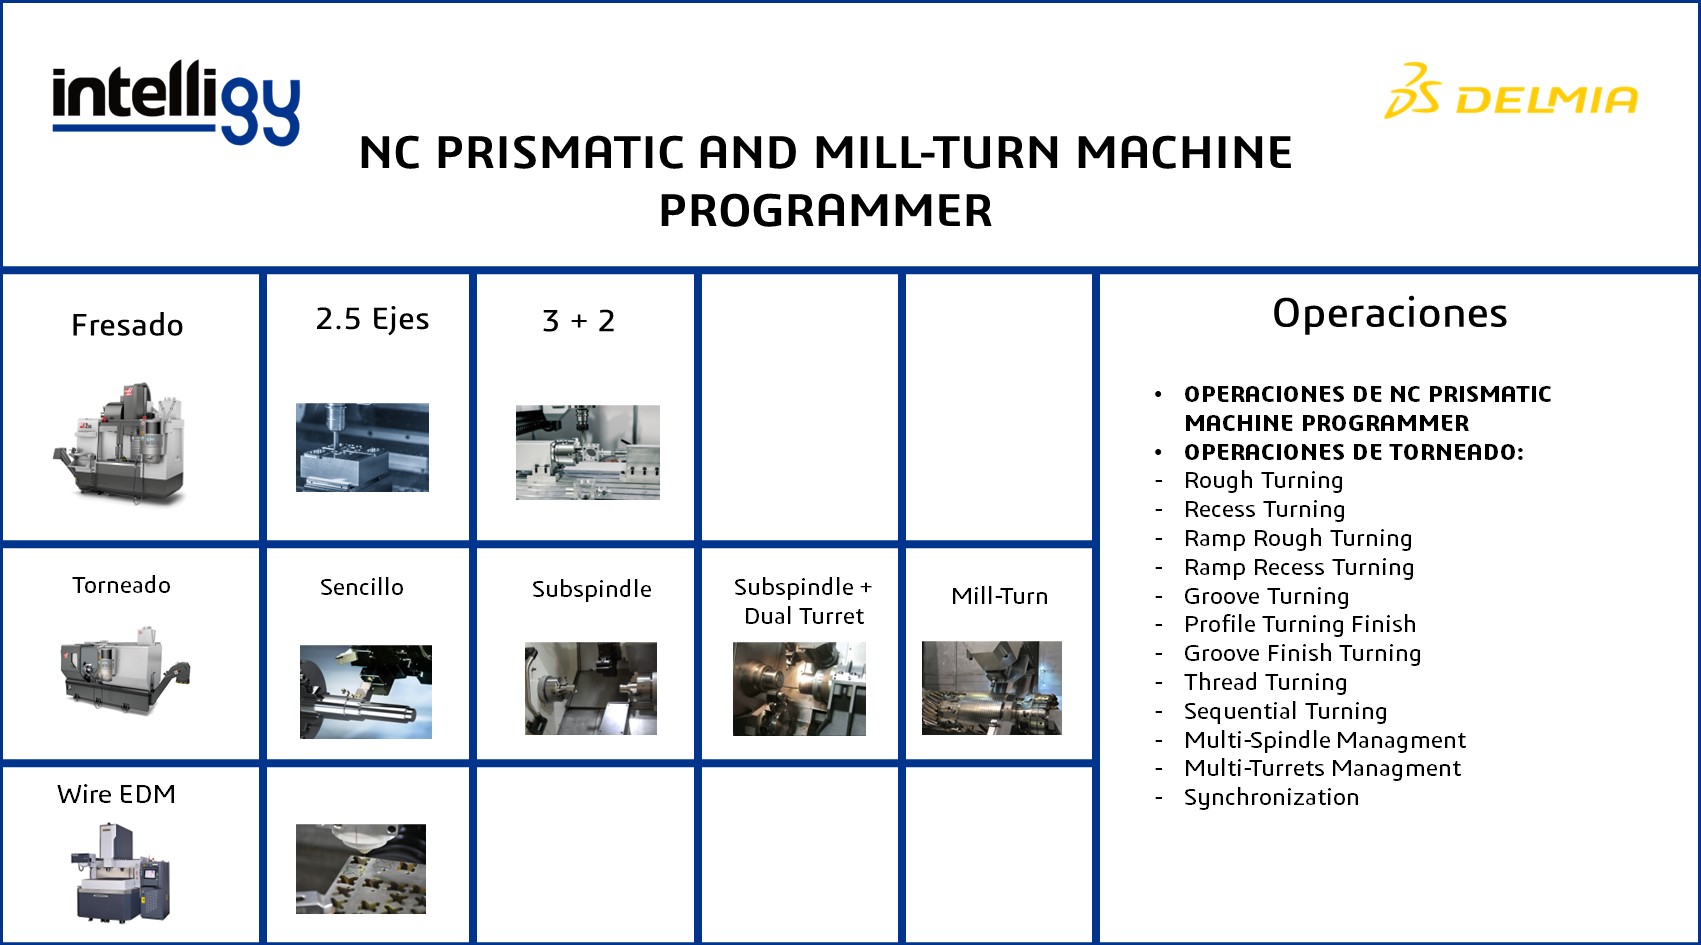 NC PRISMATIC AND MILL-TURN MACHINE PROGRAMMER